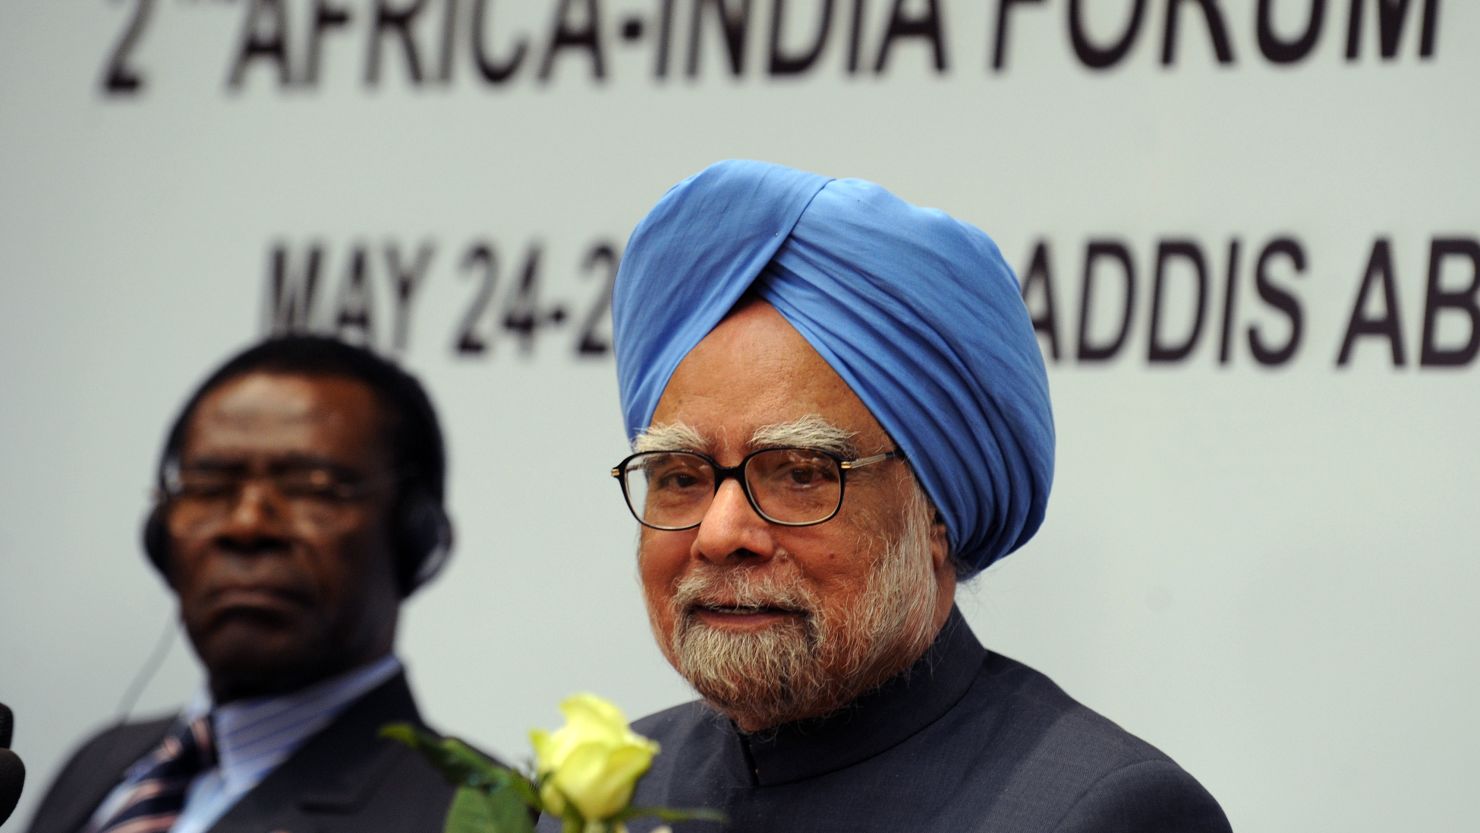 The office of Manmohan Singh, India's prime minister, has conducted a damage-limitation operation in the aftermath of the leaking of the report.